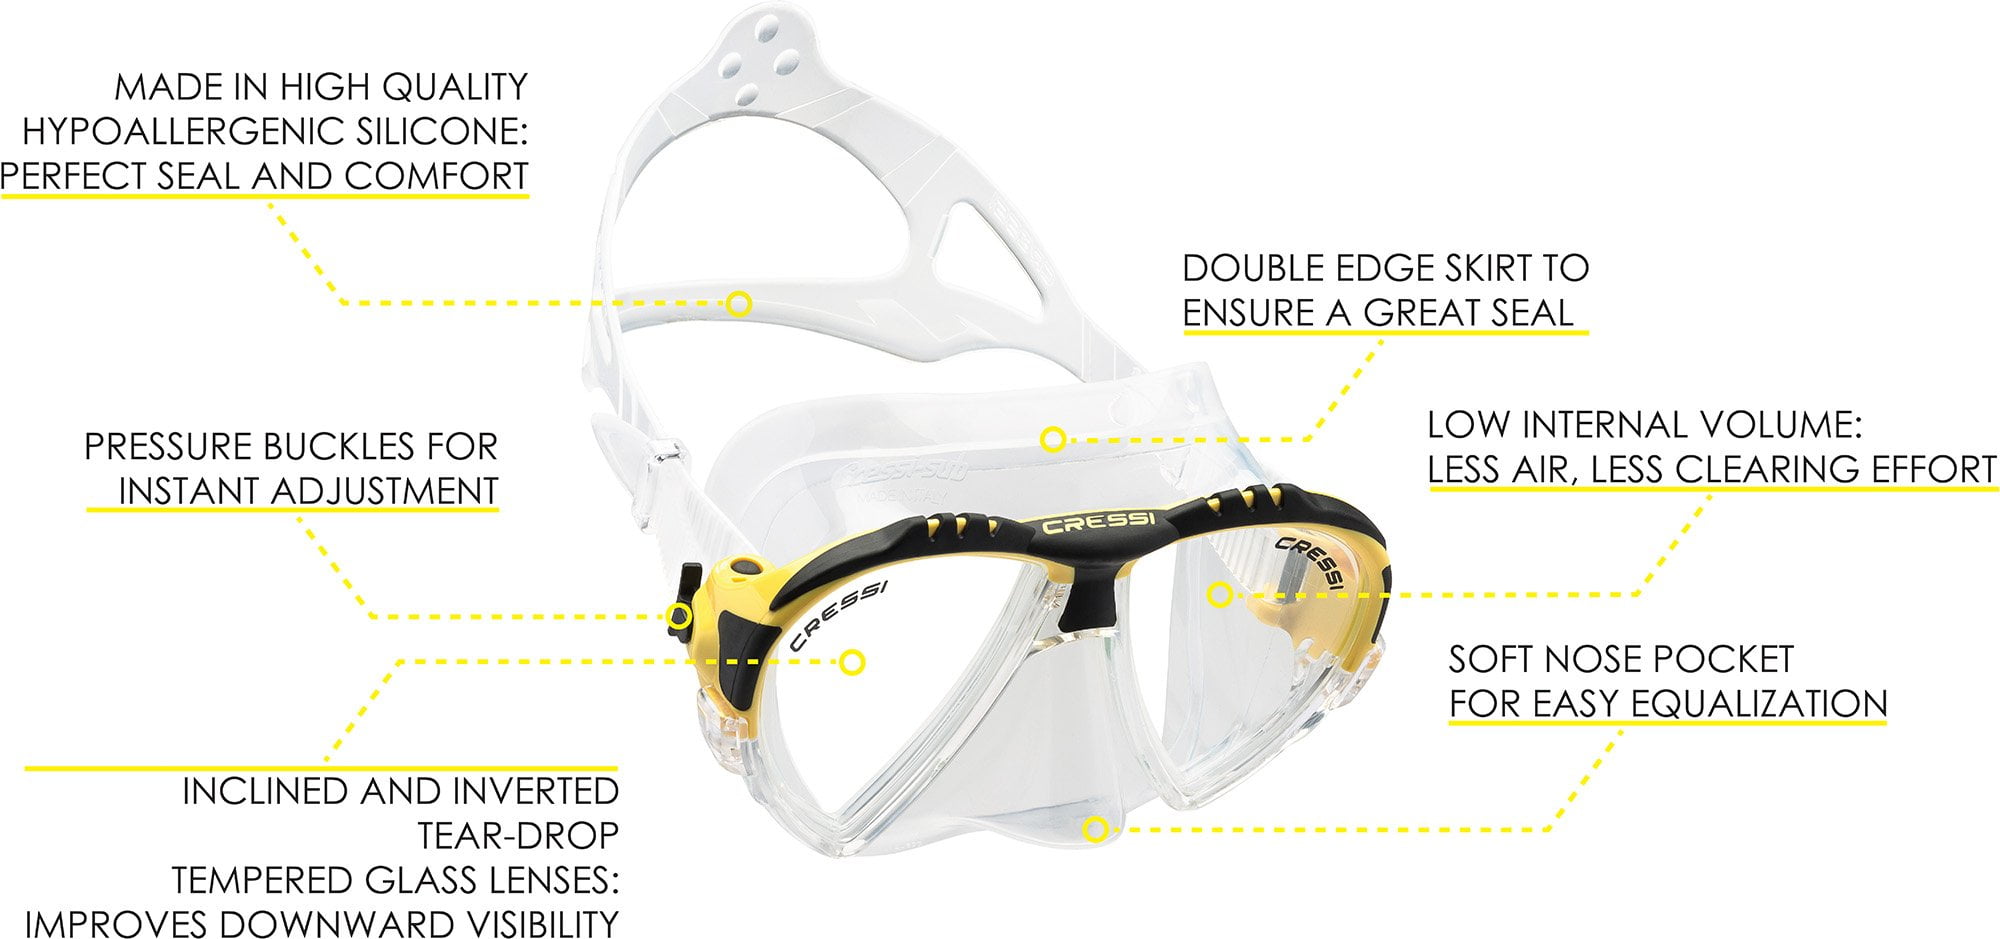 and Silicone Skirt for Scuba Diving Penta+: Made in Italy Cressi Adult Dive Mask with Inclined Lens Lateral Visibility 